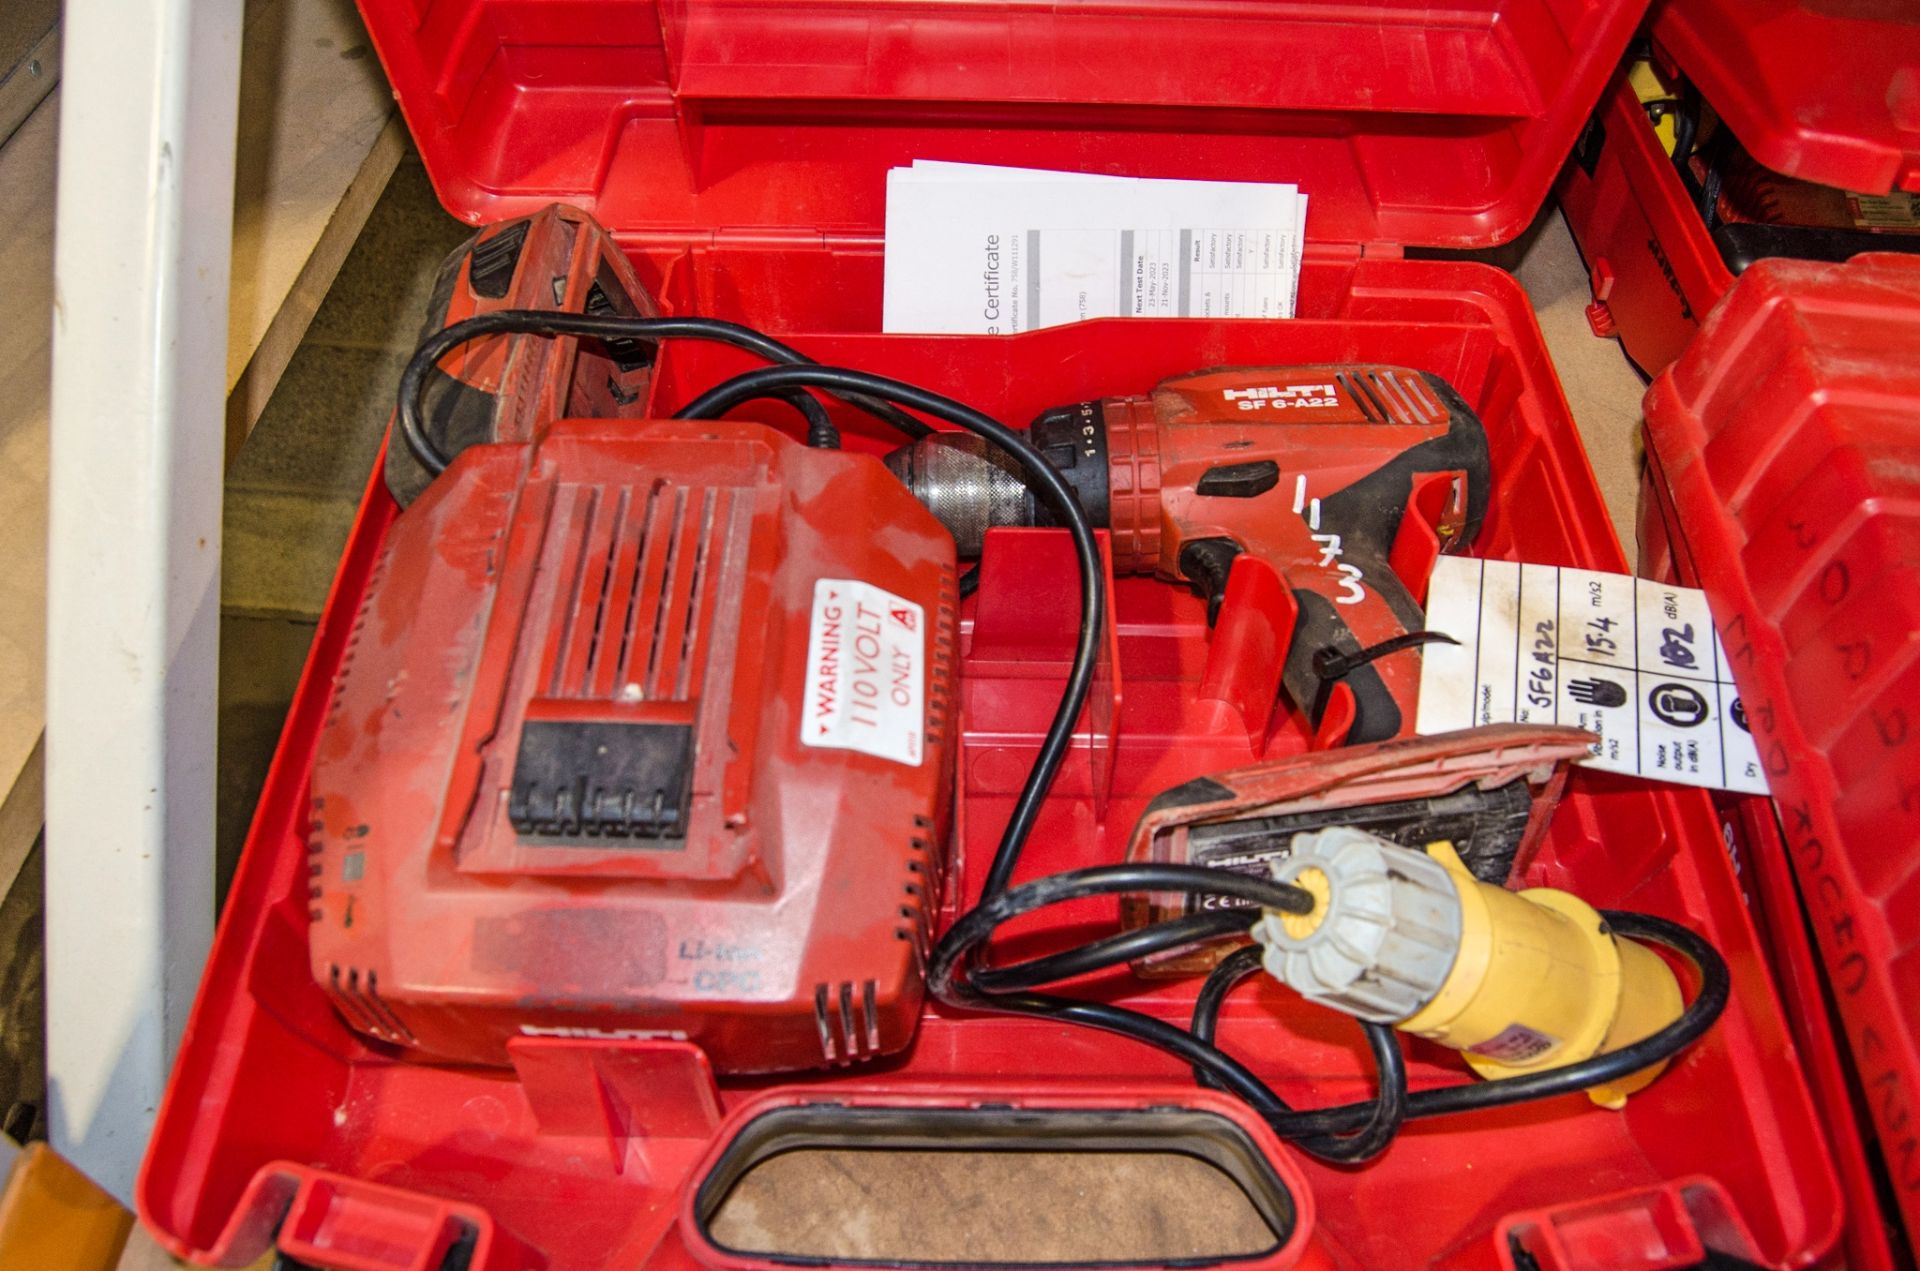 Hilti SF6-A22 22v cordless power drill c/w battery, charger and carry case A849804